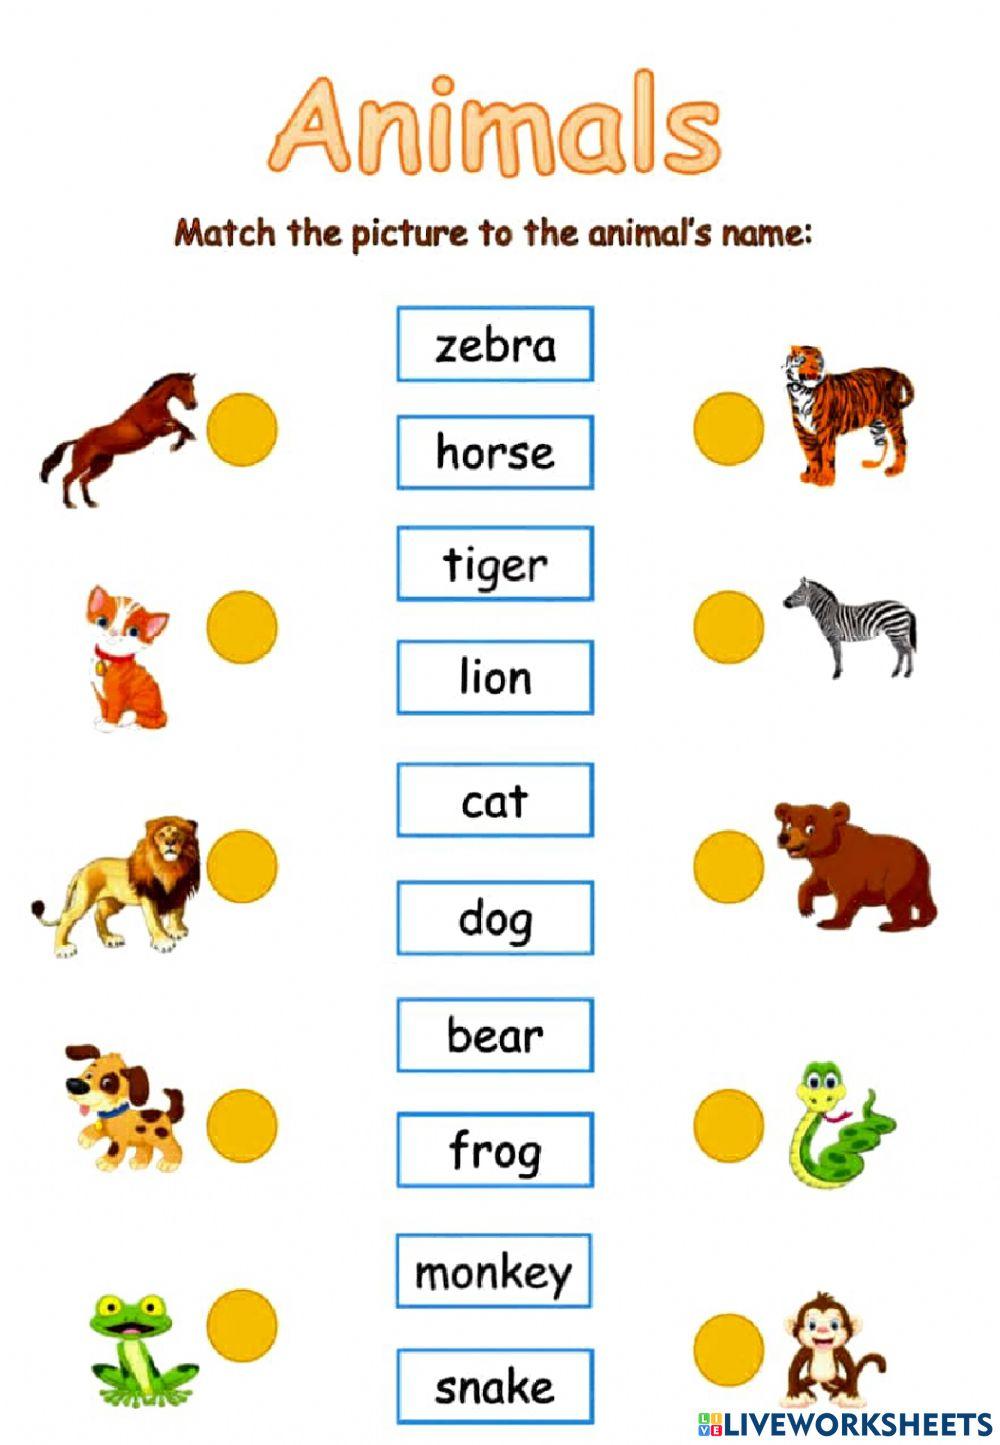 Names of animals